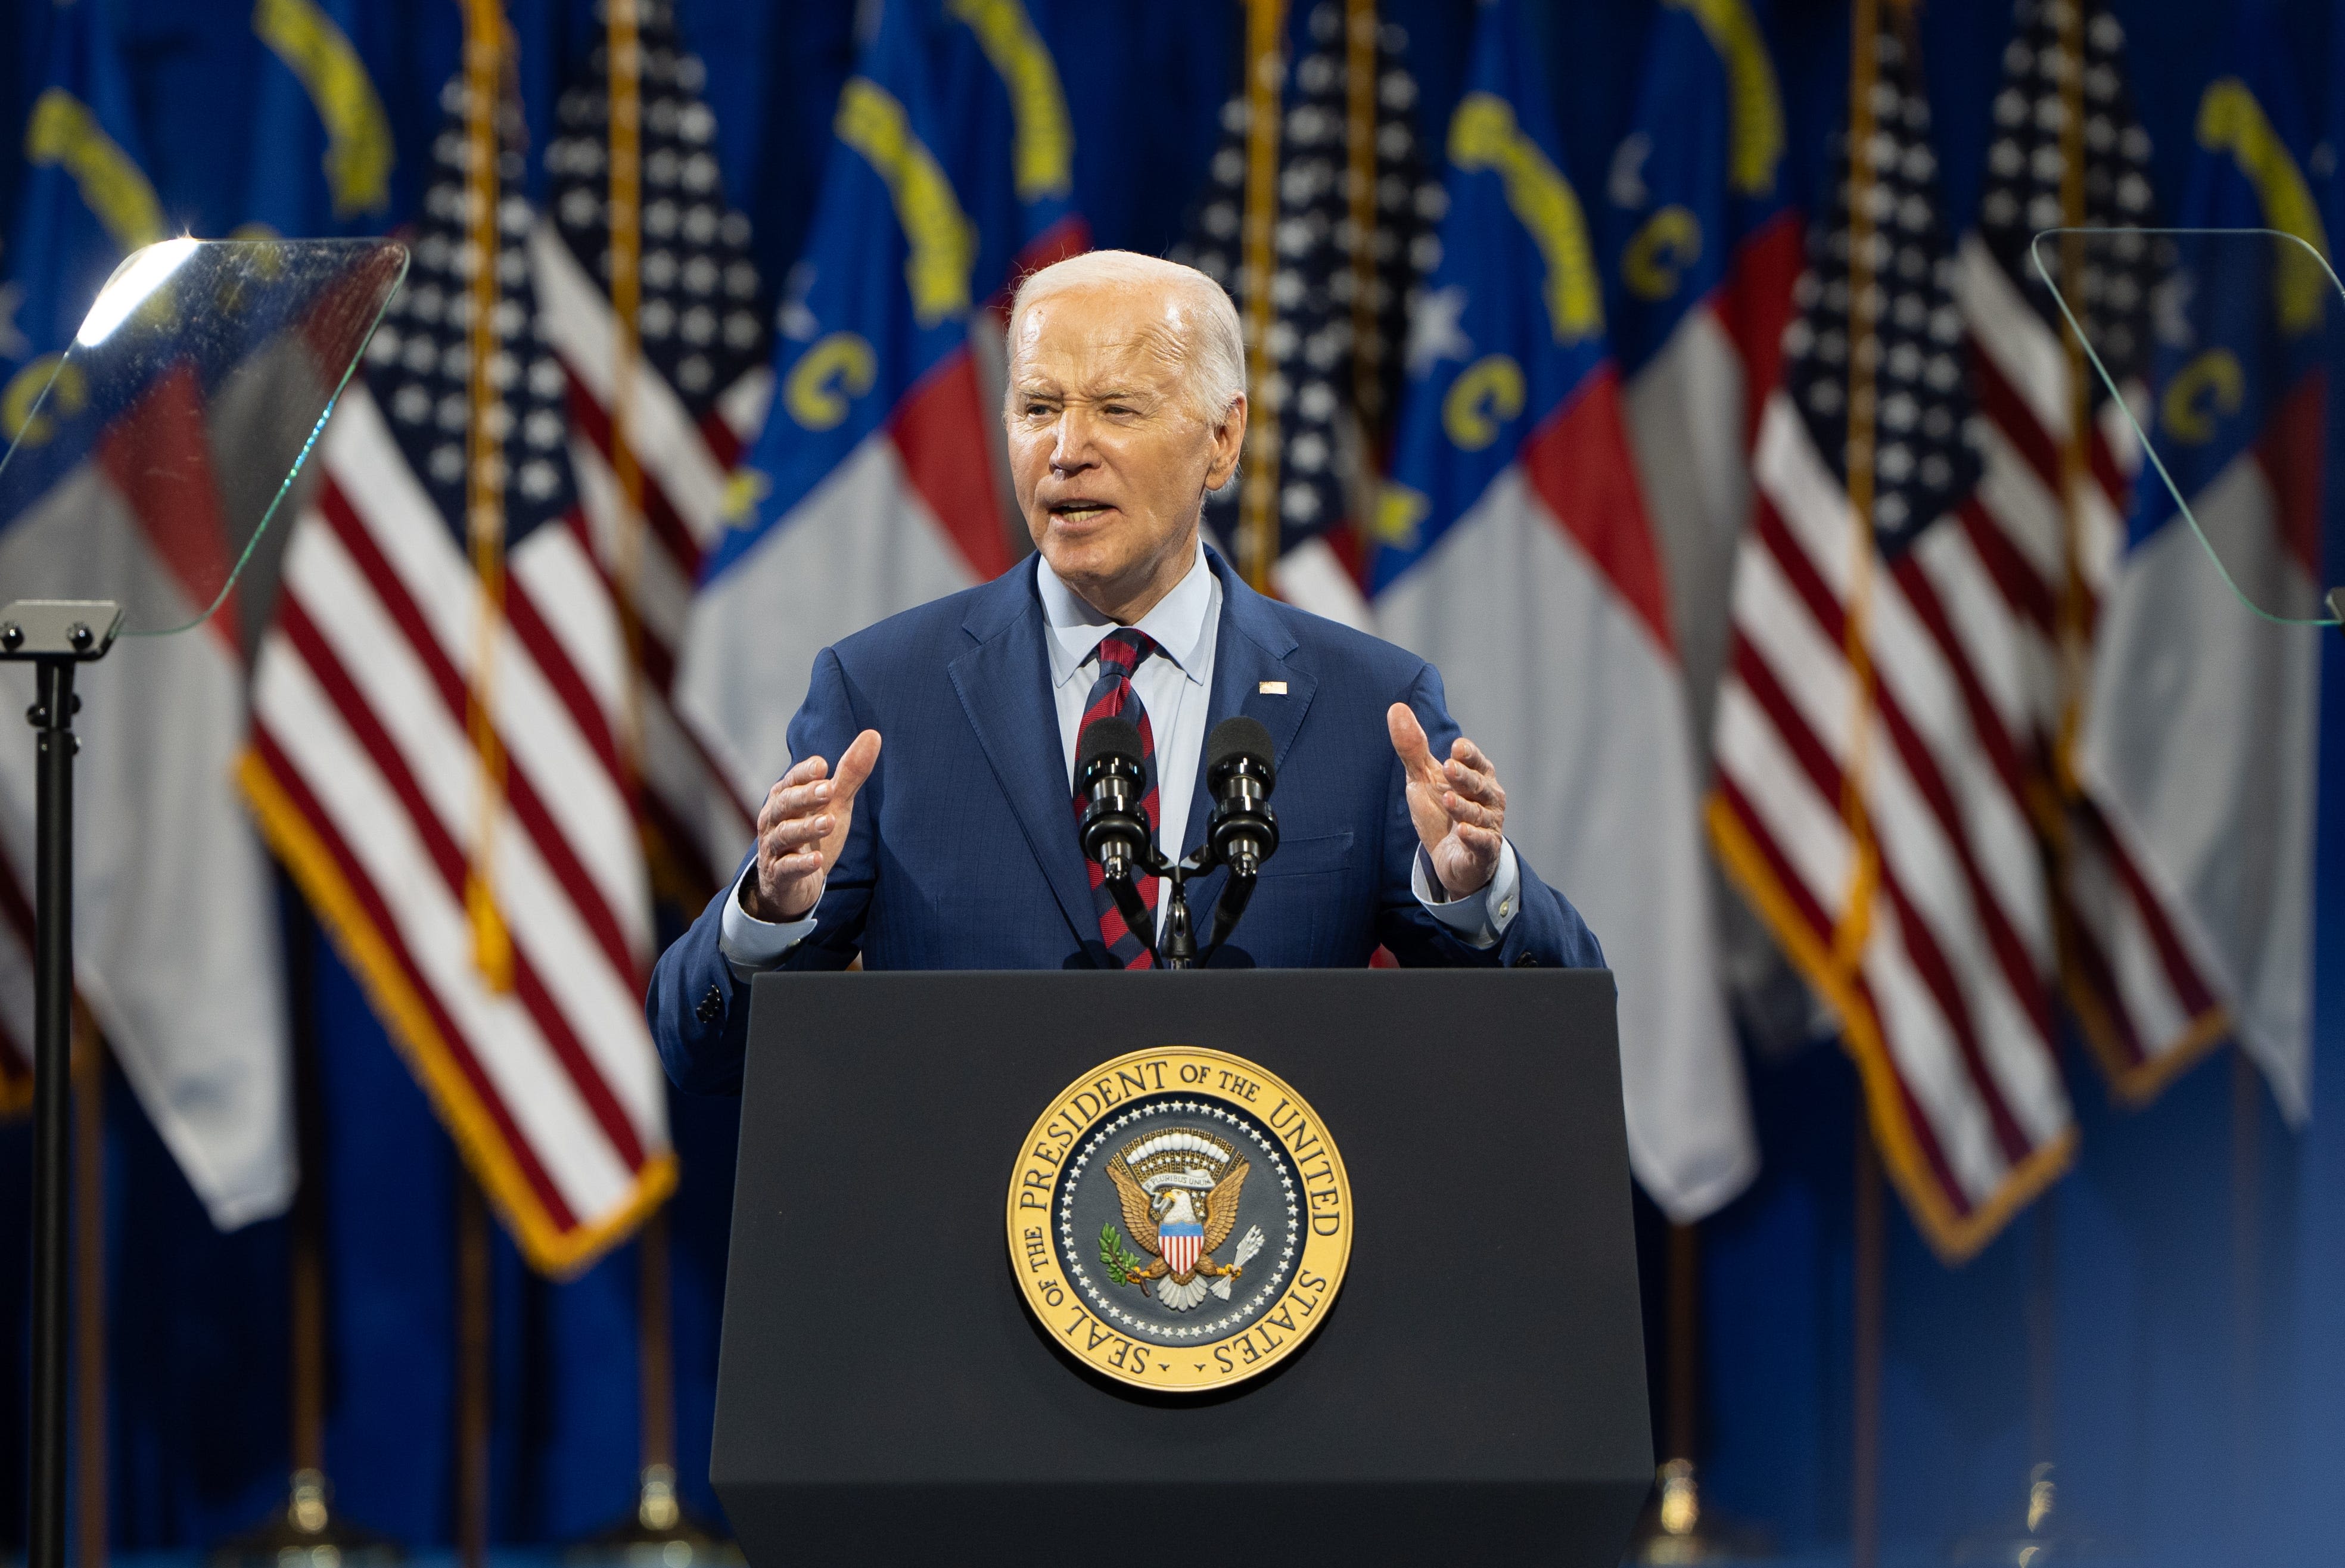 Why Biden decided to come to Wilmington to make a major environmental announcement